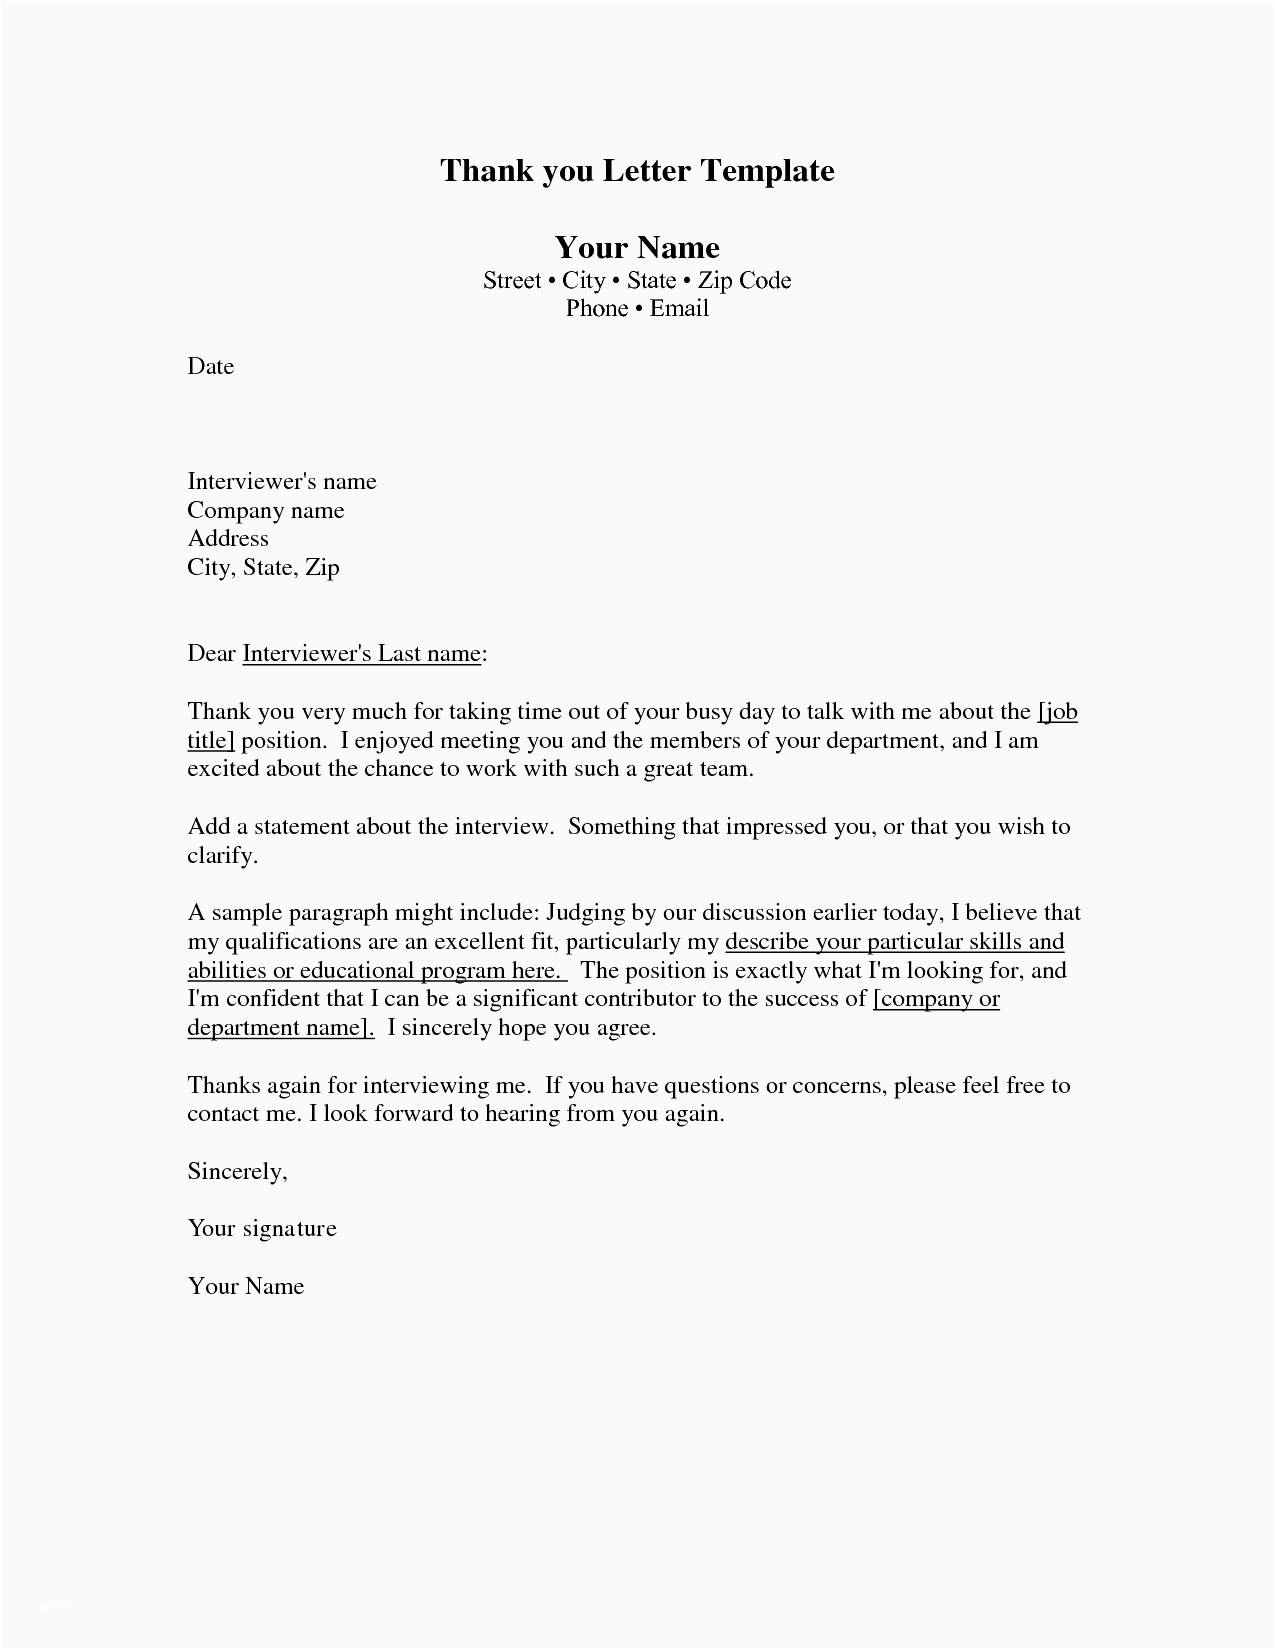 ebay-thank-you-letter-template-examples-letter-template-collection